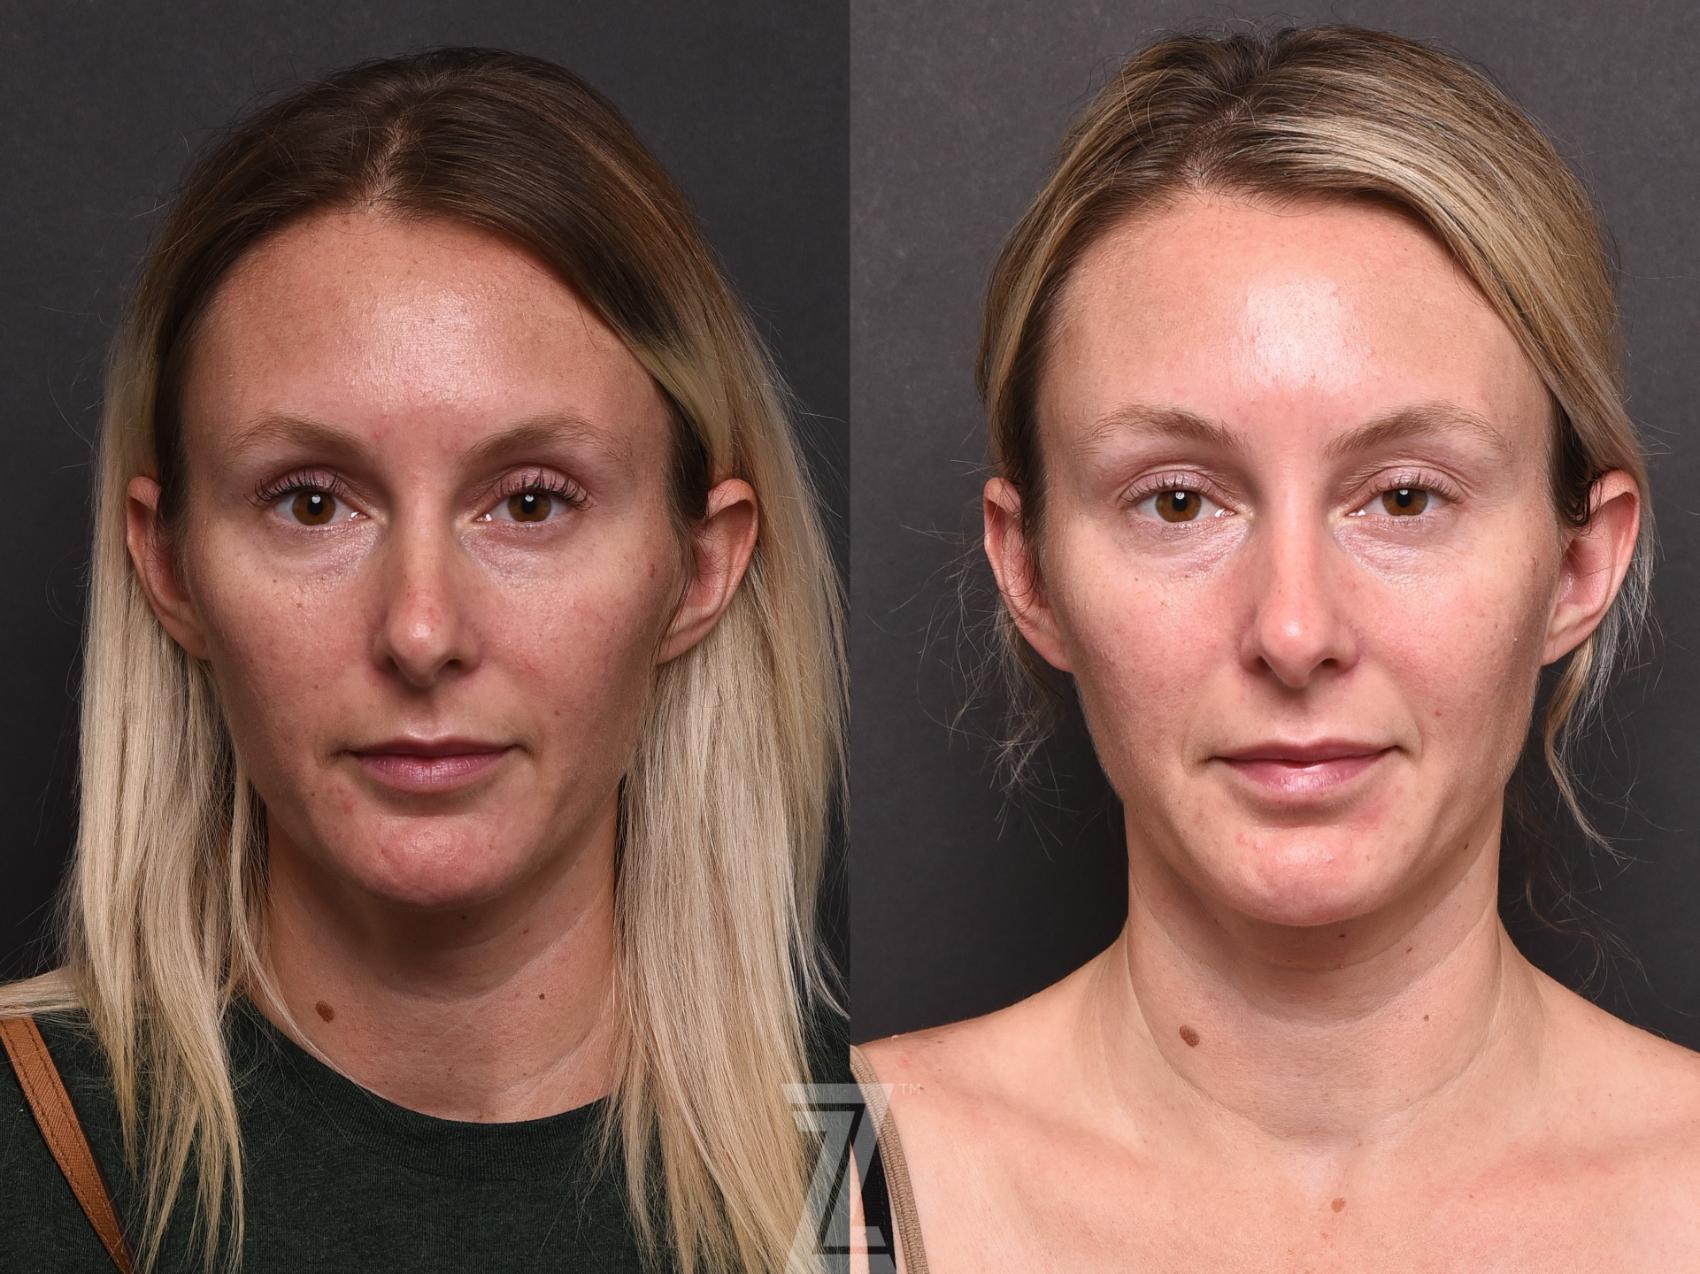 Botox, Neurotoxin, Dysport, Before and After, B&A, Tummy Tuck, Breast Aug, Breast Lift, Mastopexy, MMO, Mommy Makeover, Dr. Rocco Piazza, The Piazza Center, Austin, Tx, Halo, BBLlaser